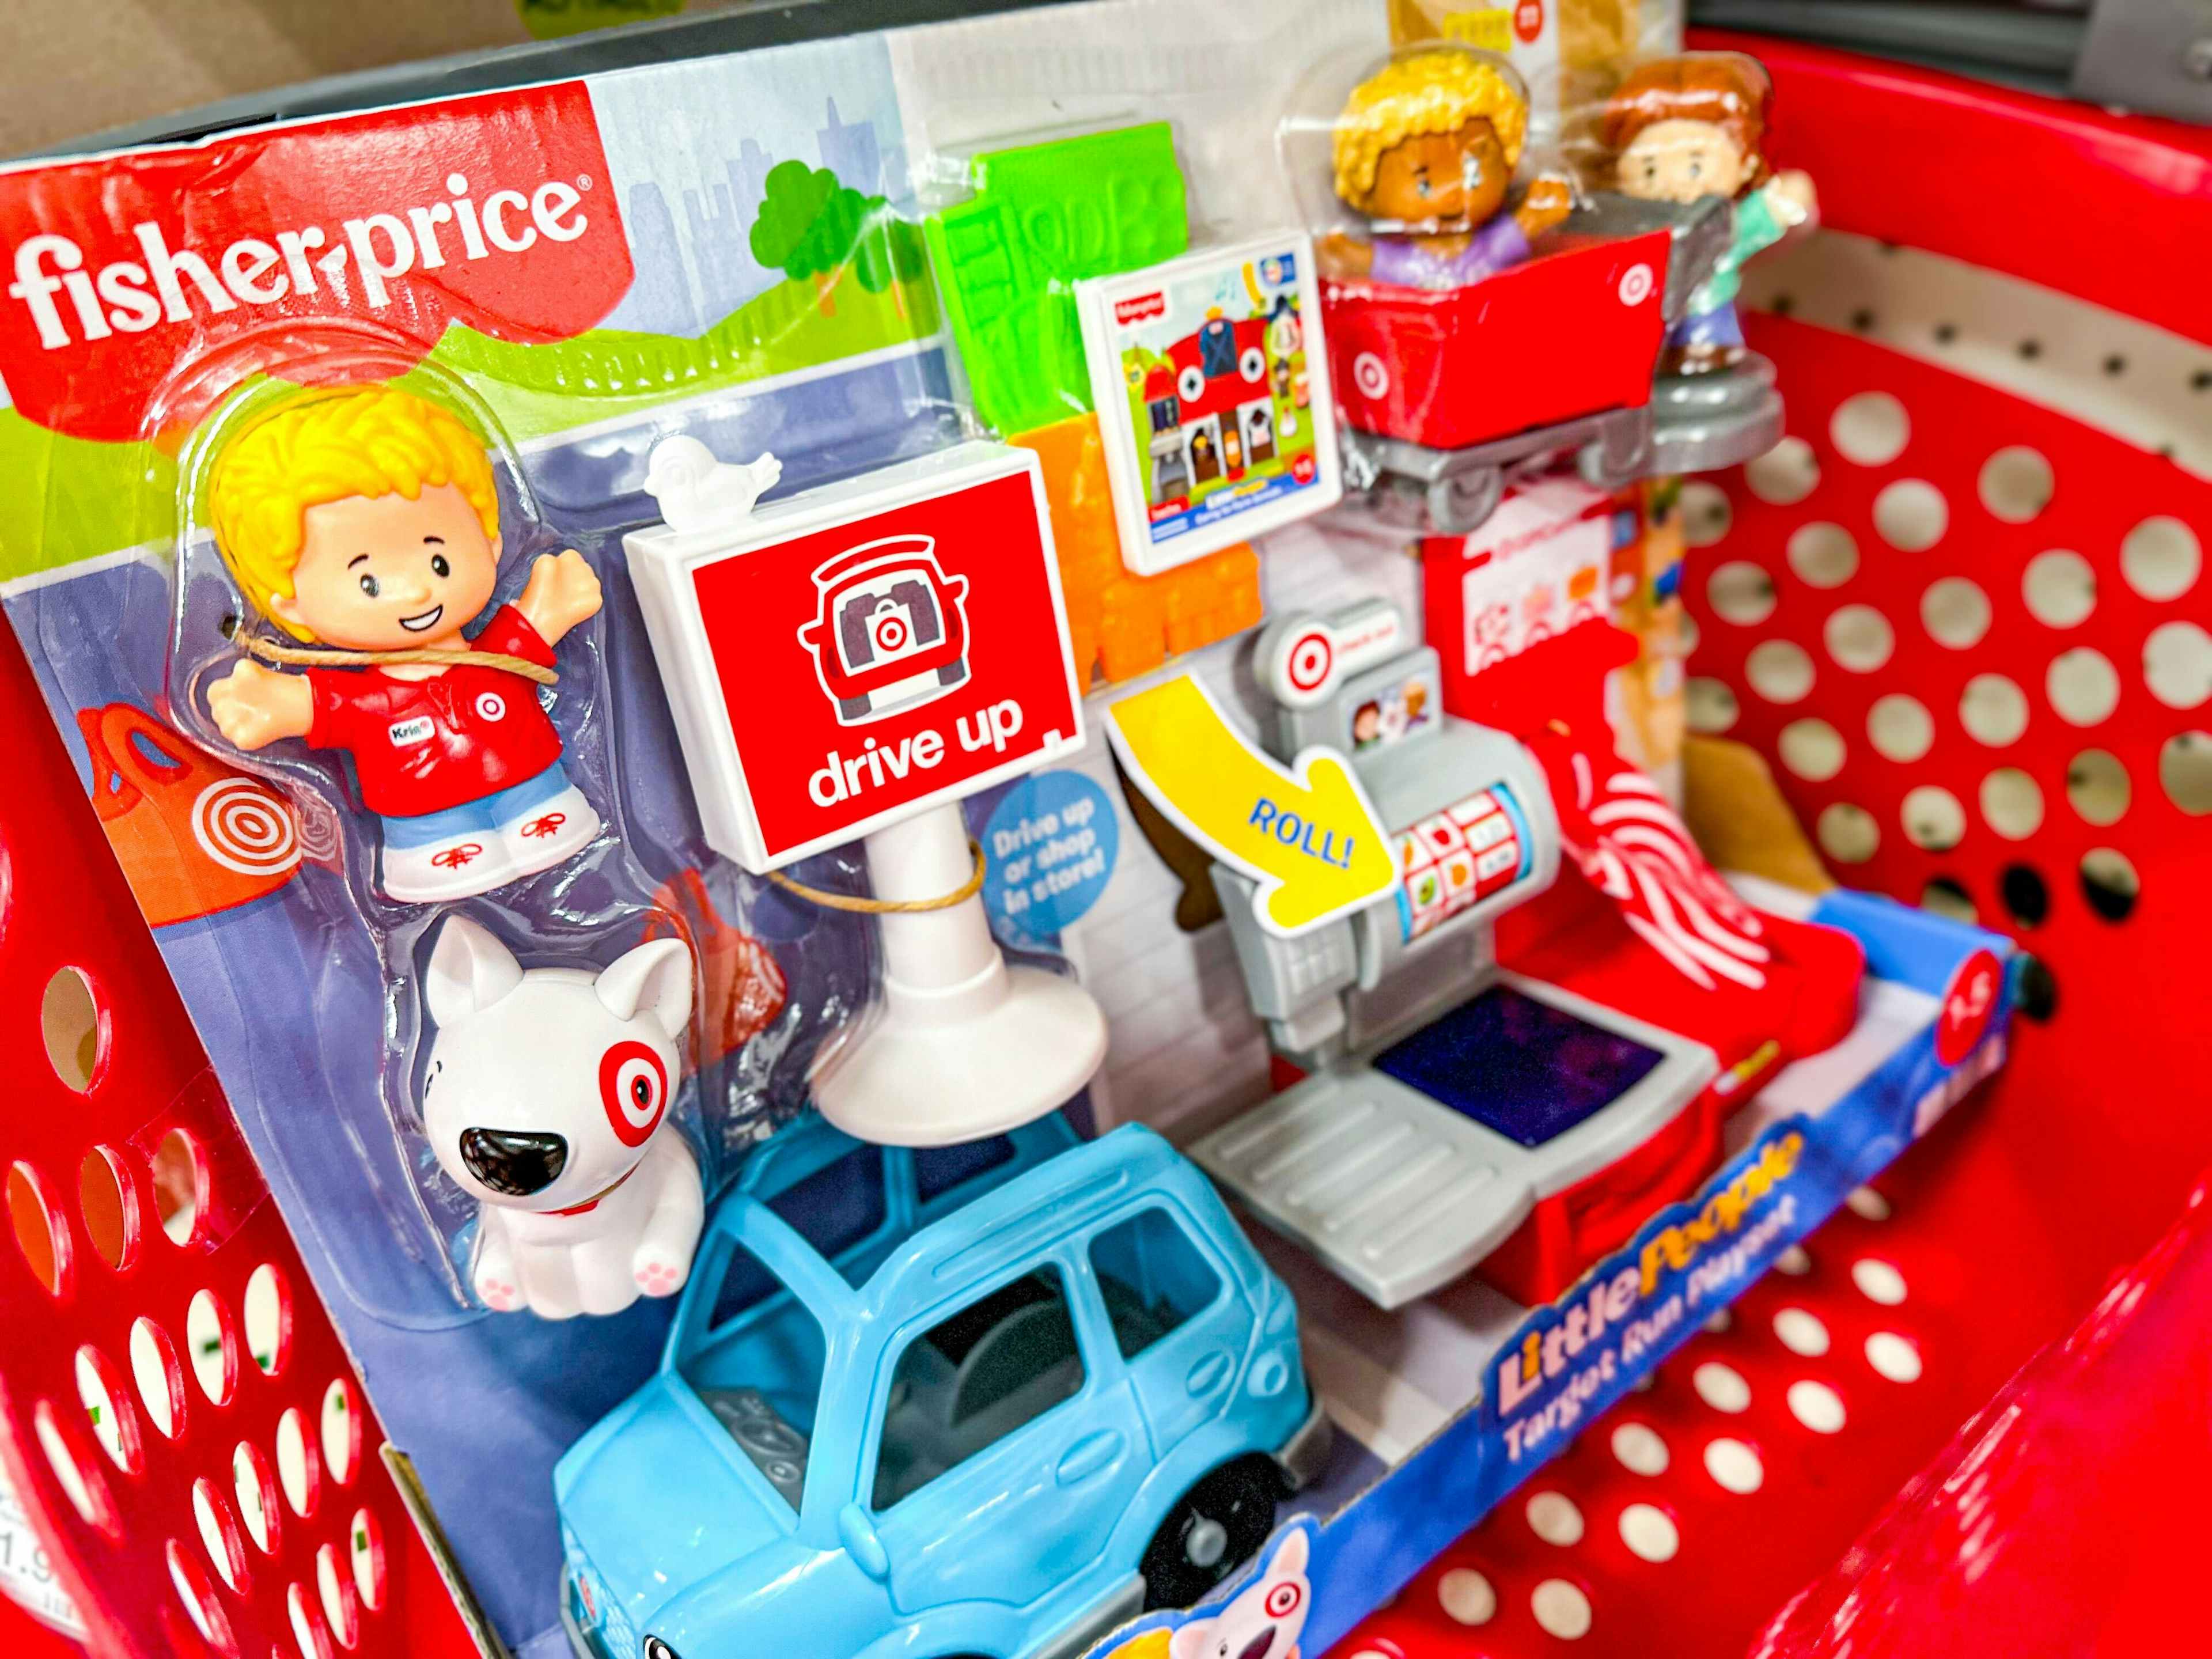 target-edition-toys-fisher-price-little-people-kcl-6